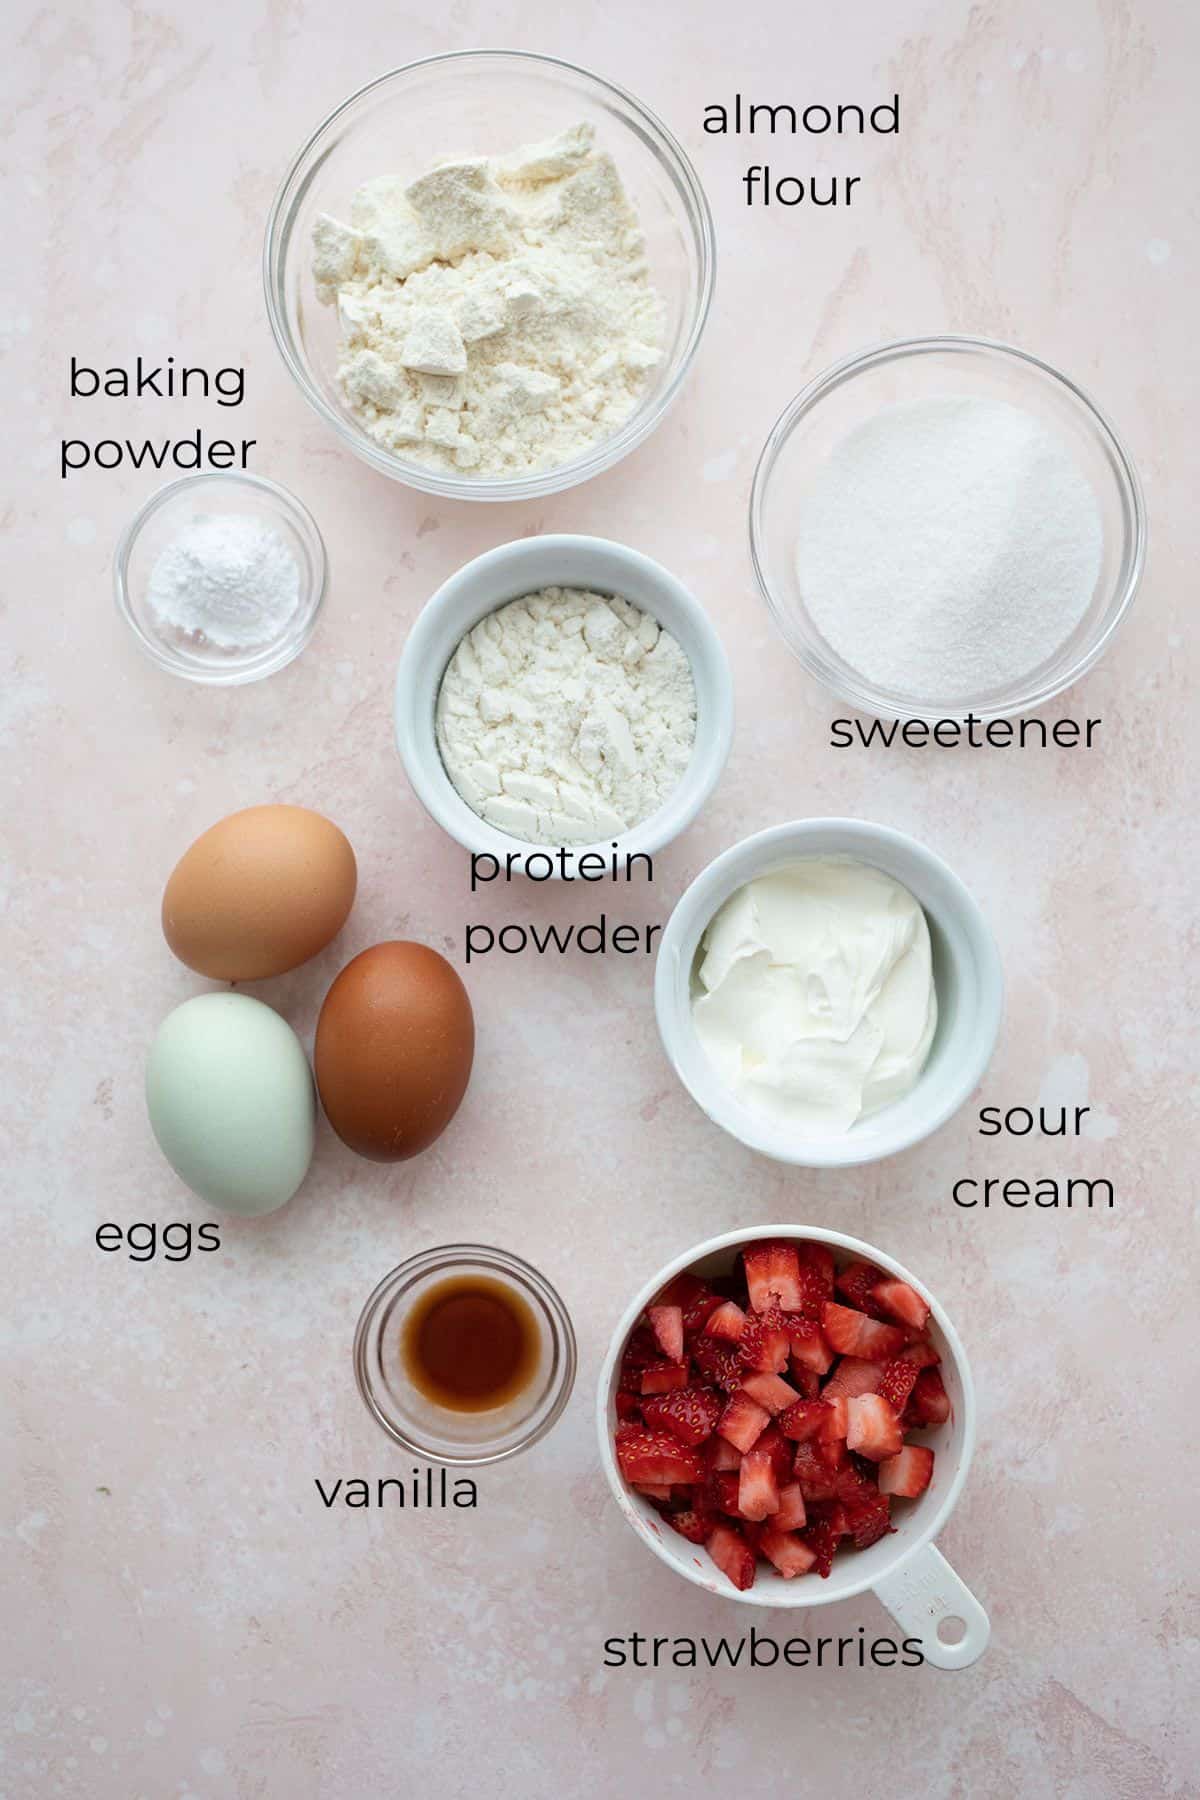 Top down image of ingredients needed for strawberry cupcakes.